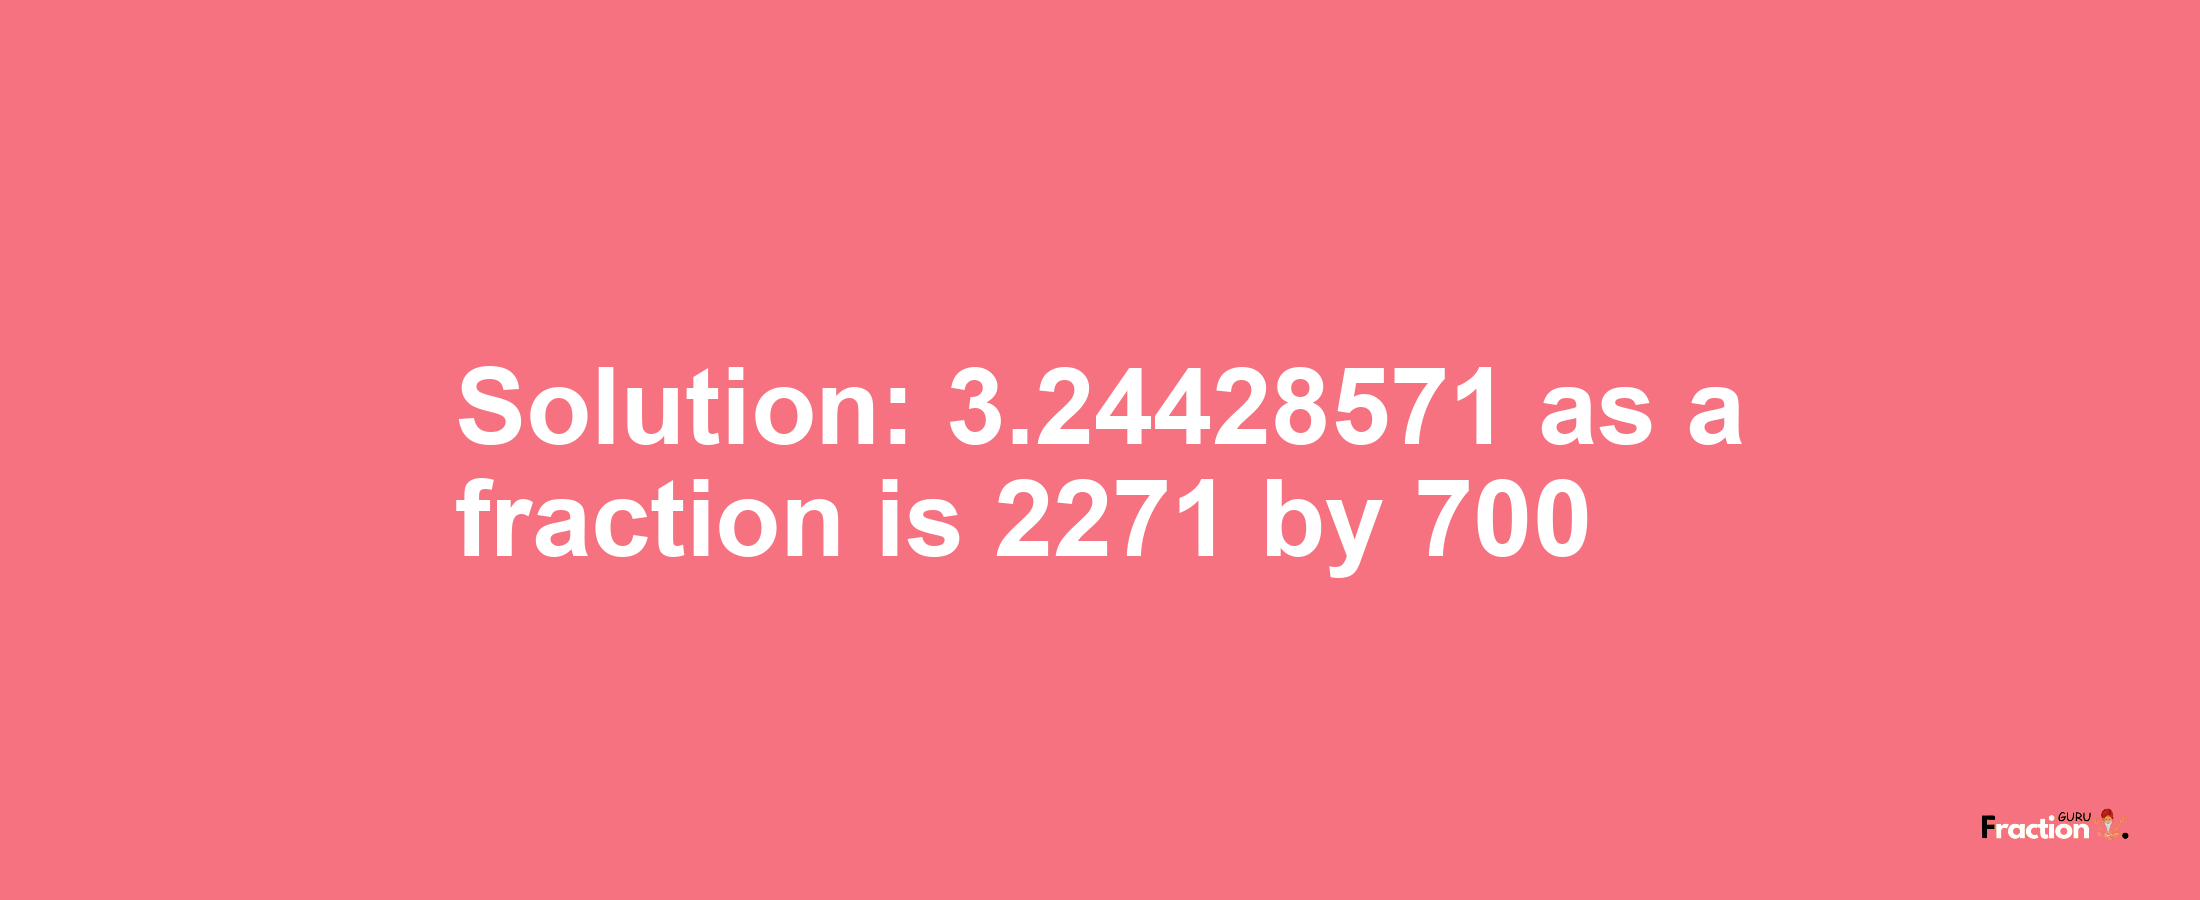 Solution:3.24428571 as a fraction is 2271/700